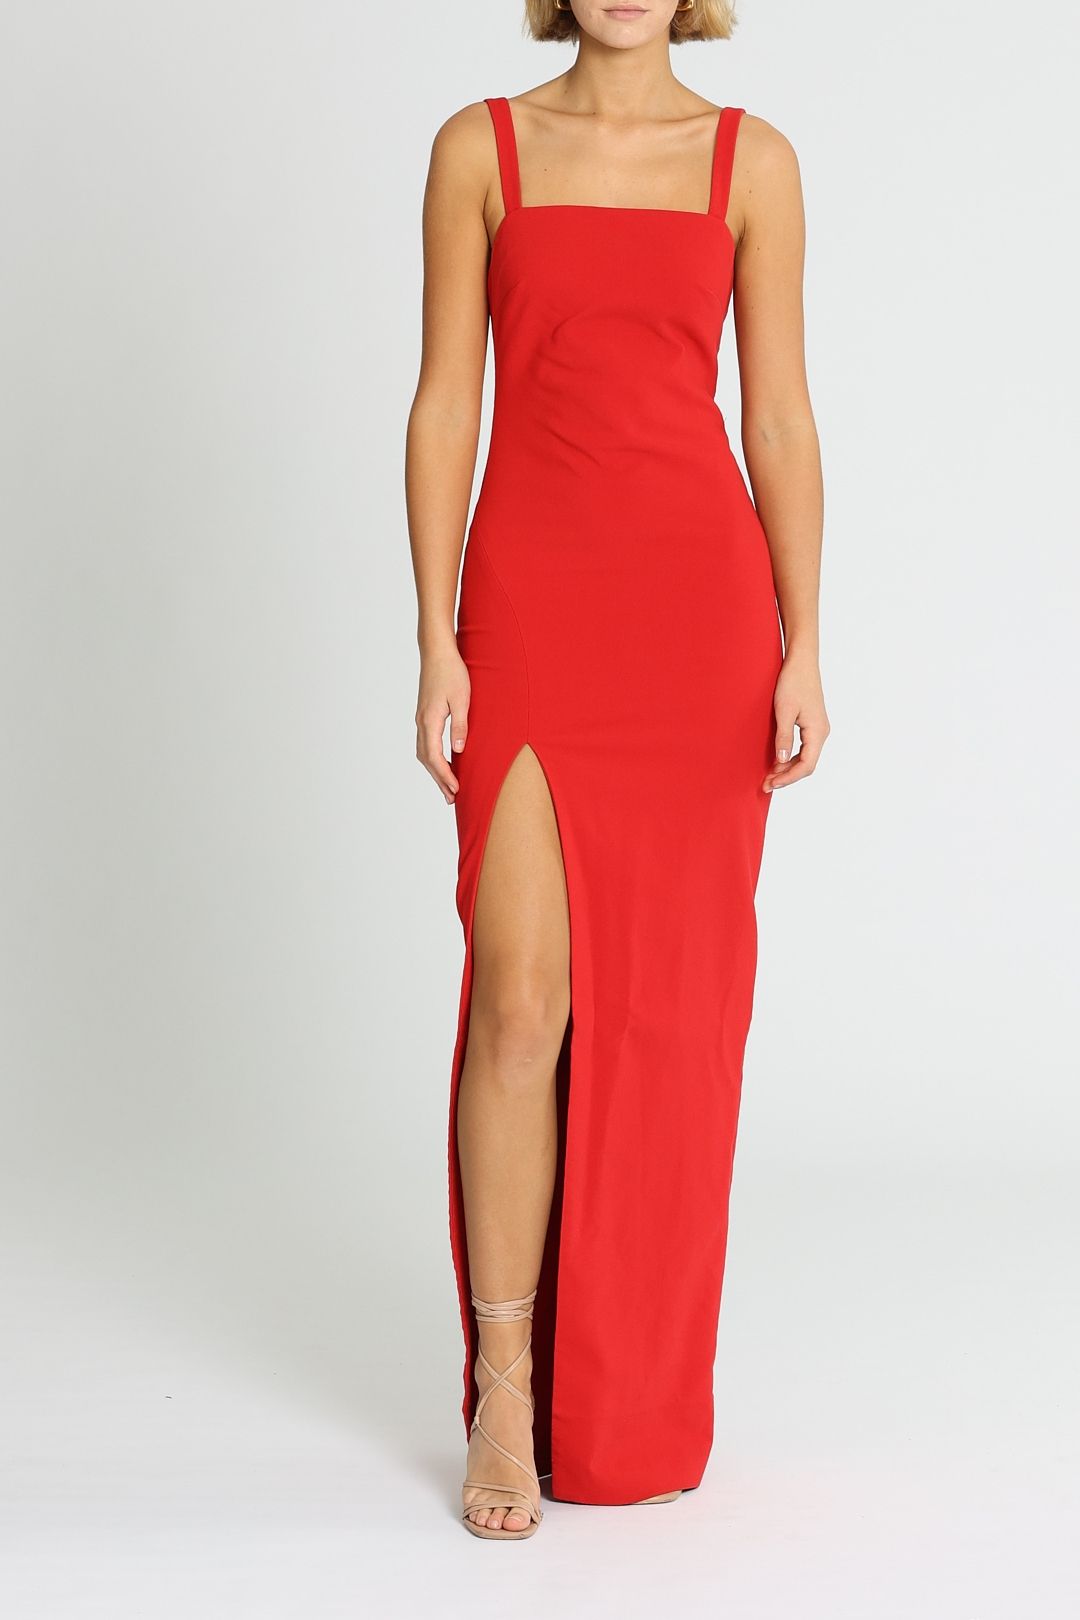 Likely NYC Bethany Gown Red